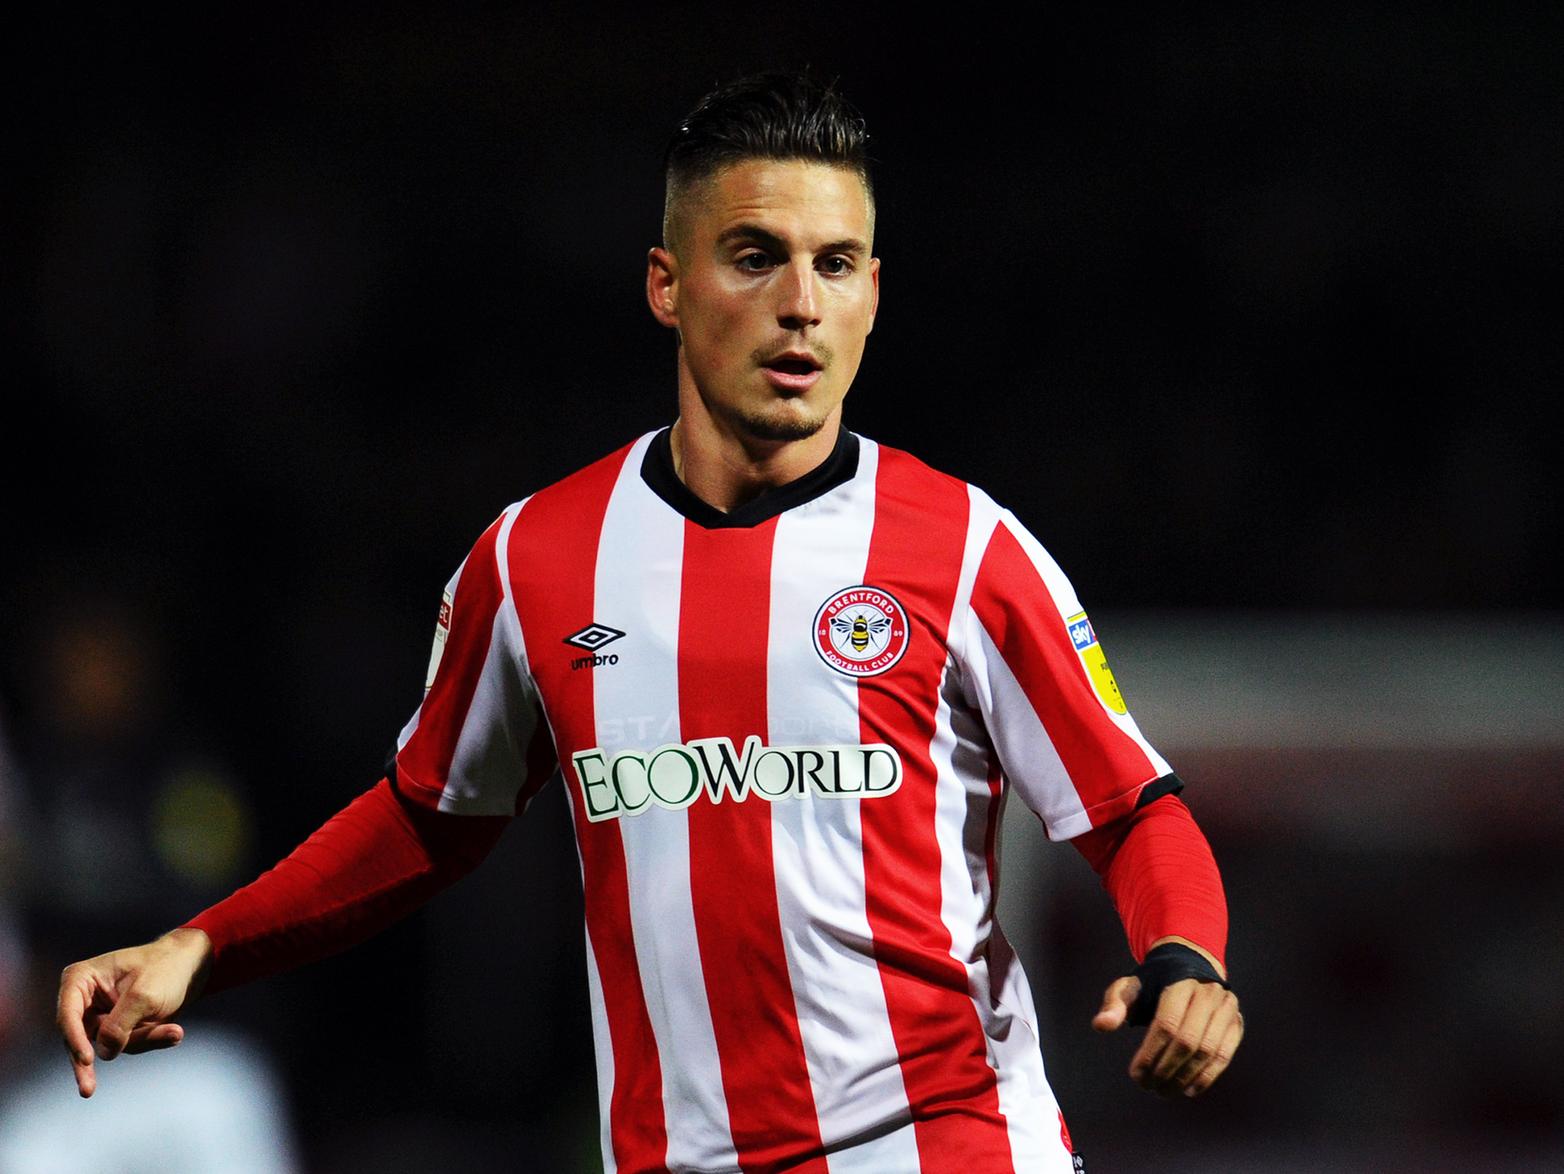 Brentford has successfully tied down star winger Sergi Canos to a new four-year deal, after fighting off interest from the likes of Russian side FC Krasnador over the summer. (BBC Sport)